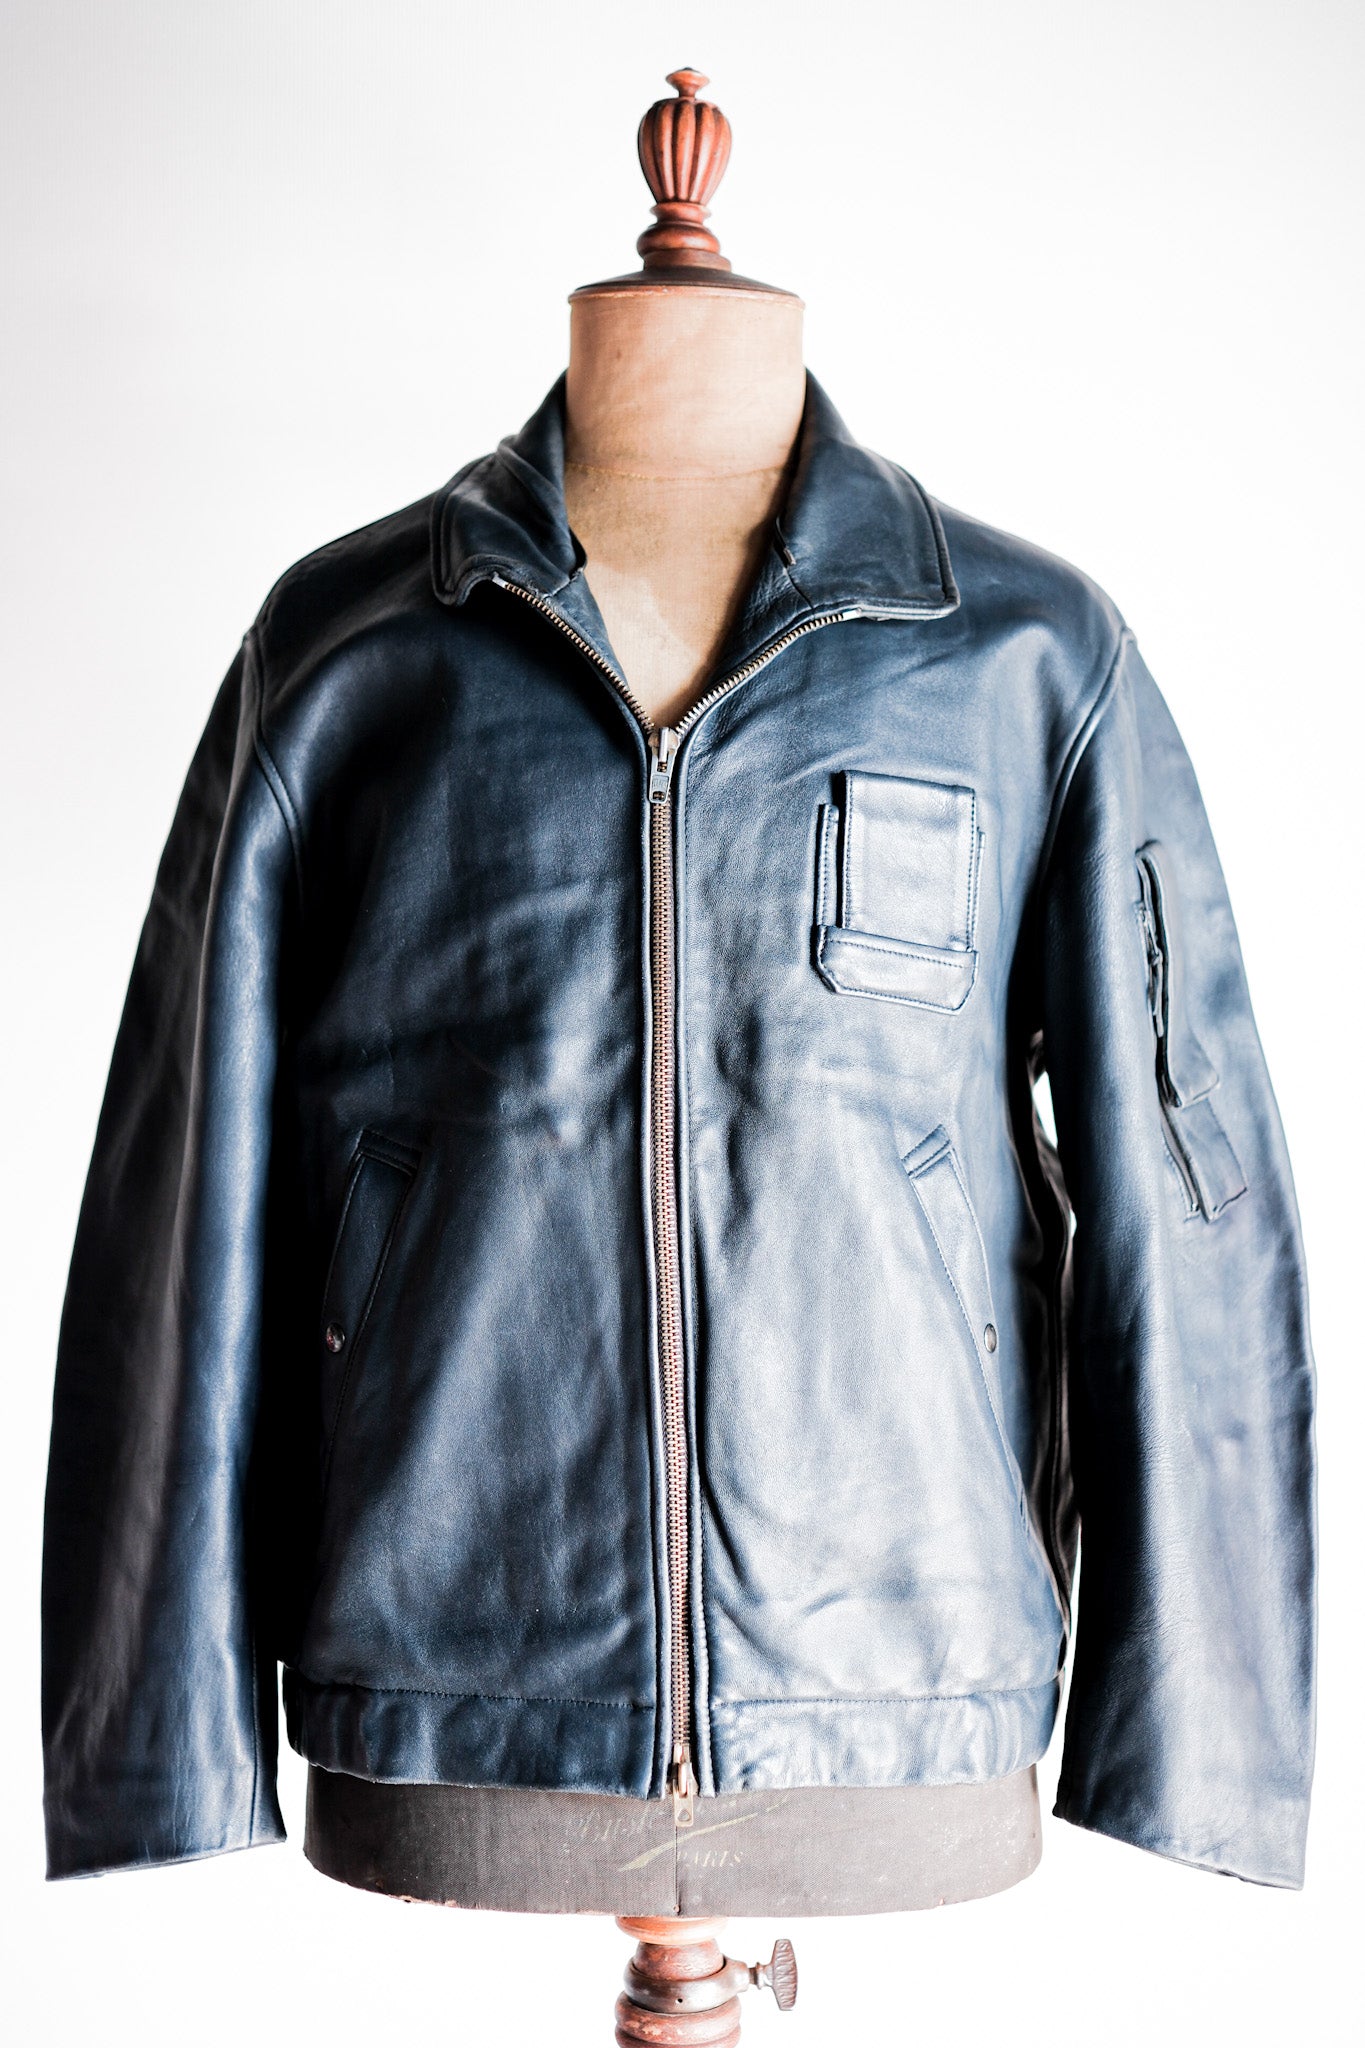 [~ 70's] French Air Force Pilot Leather Jacket with China Strap